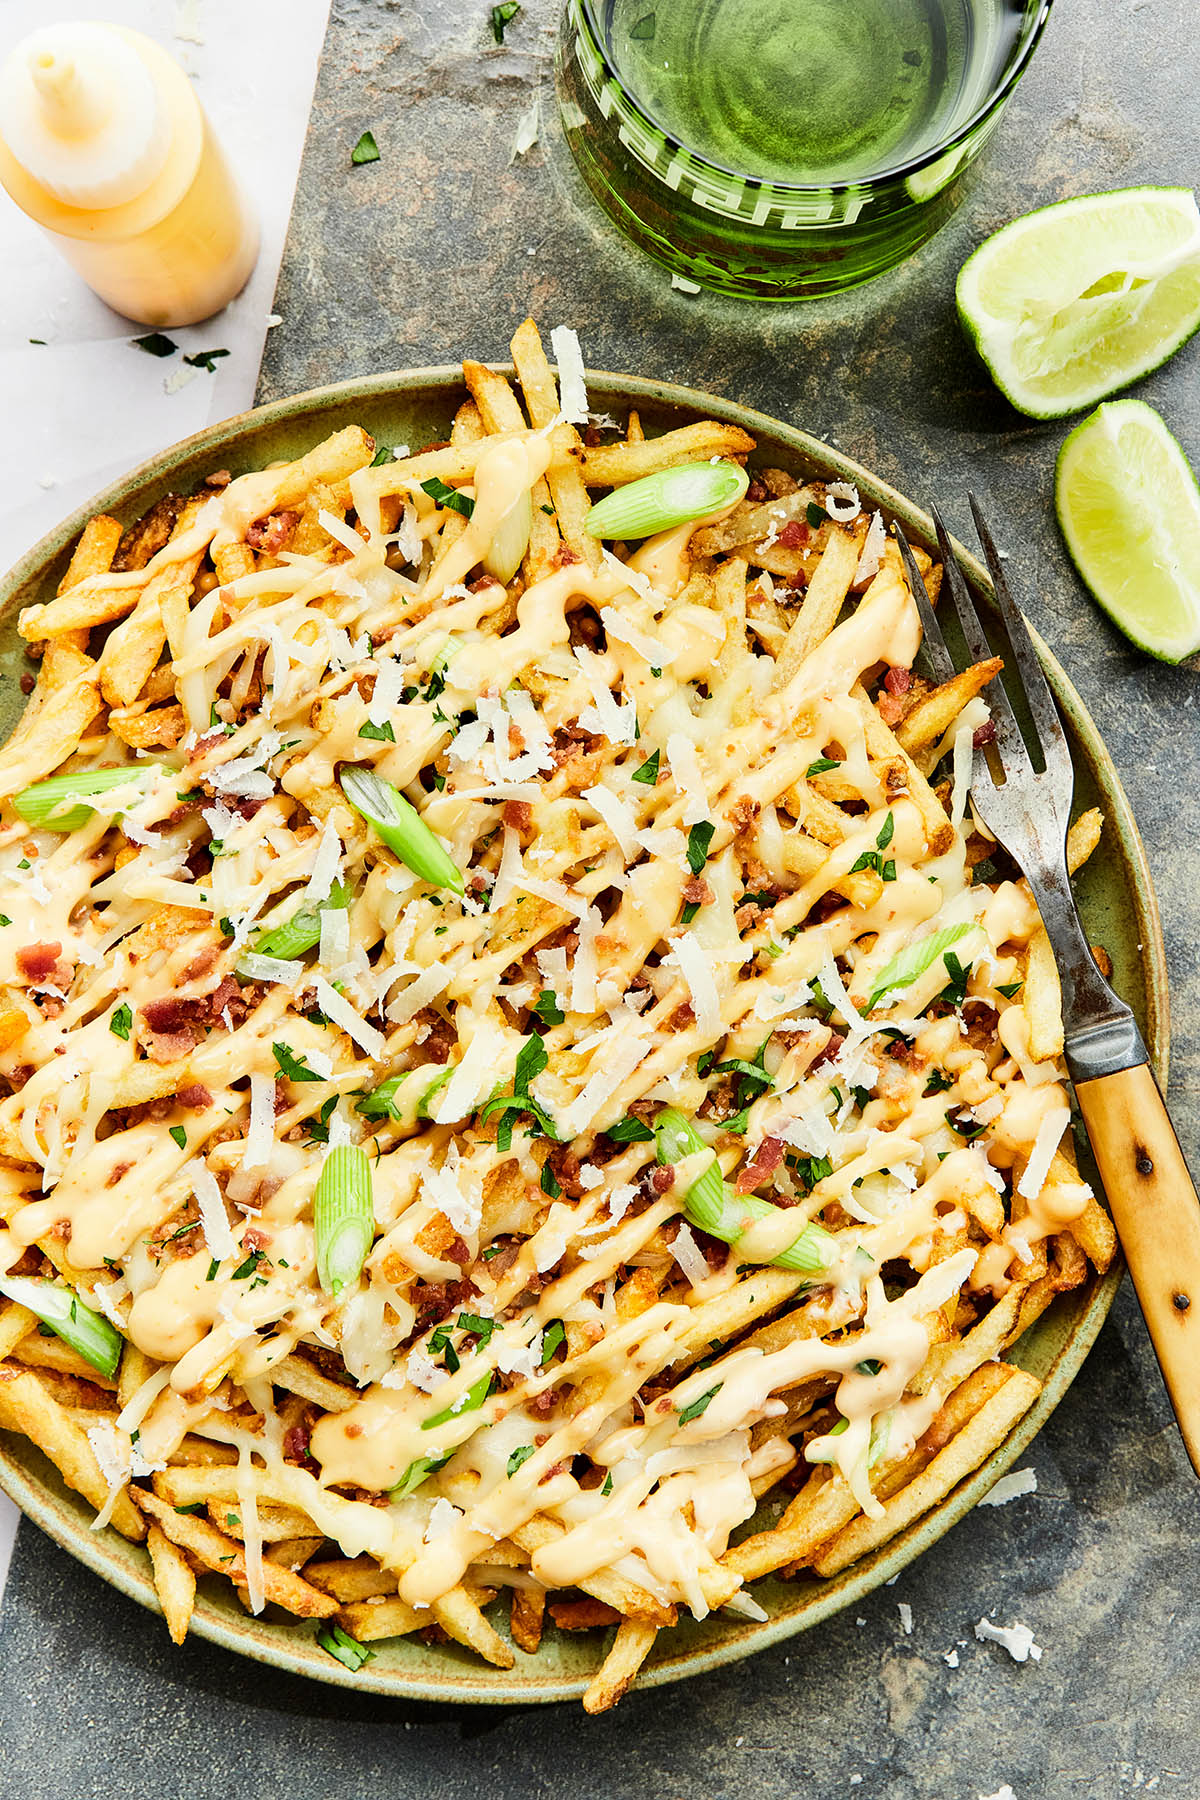 A plate of loaded fries drizzled generously with spicy garlic aioli.